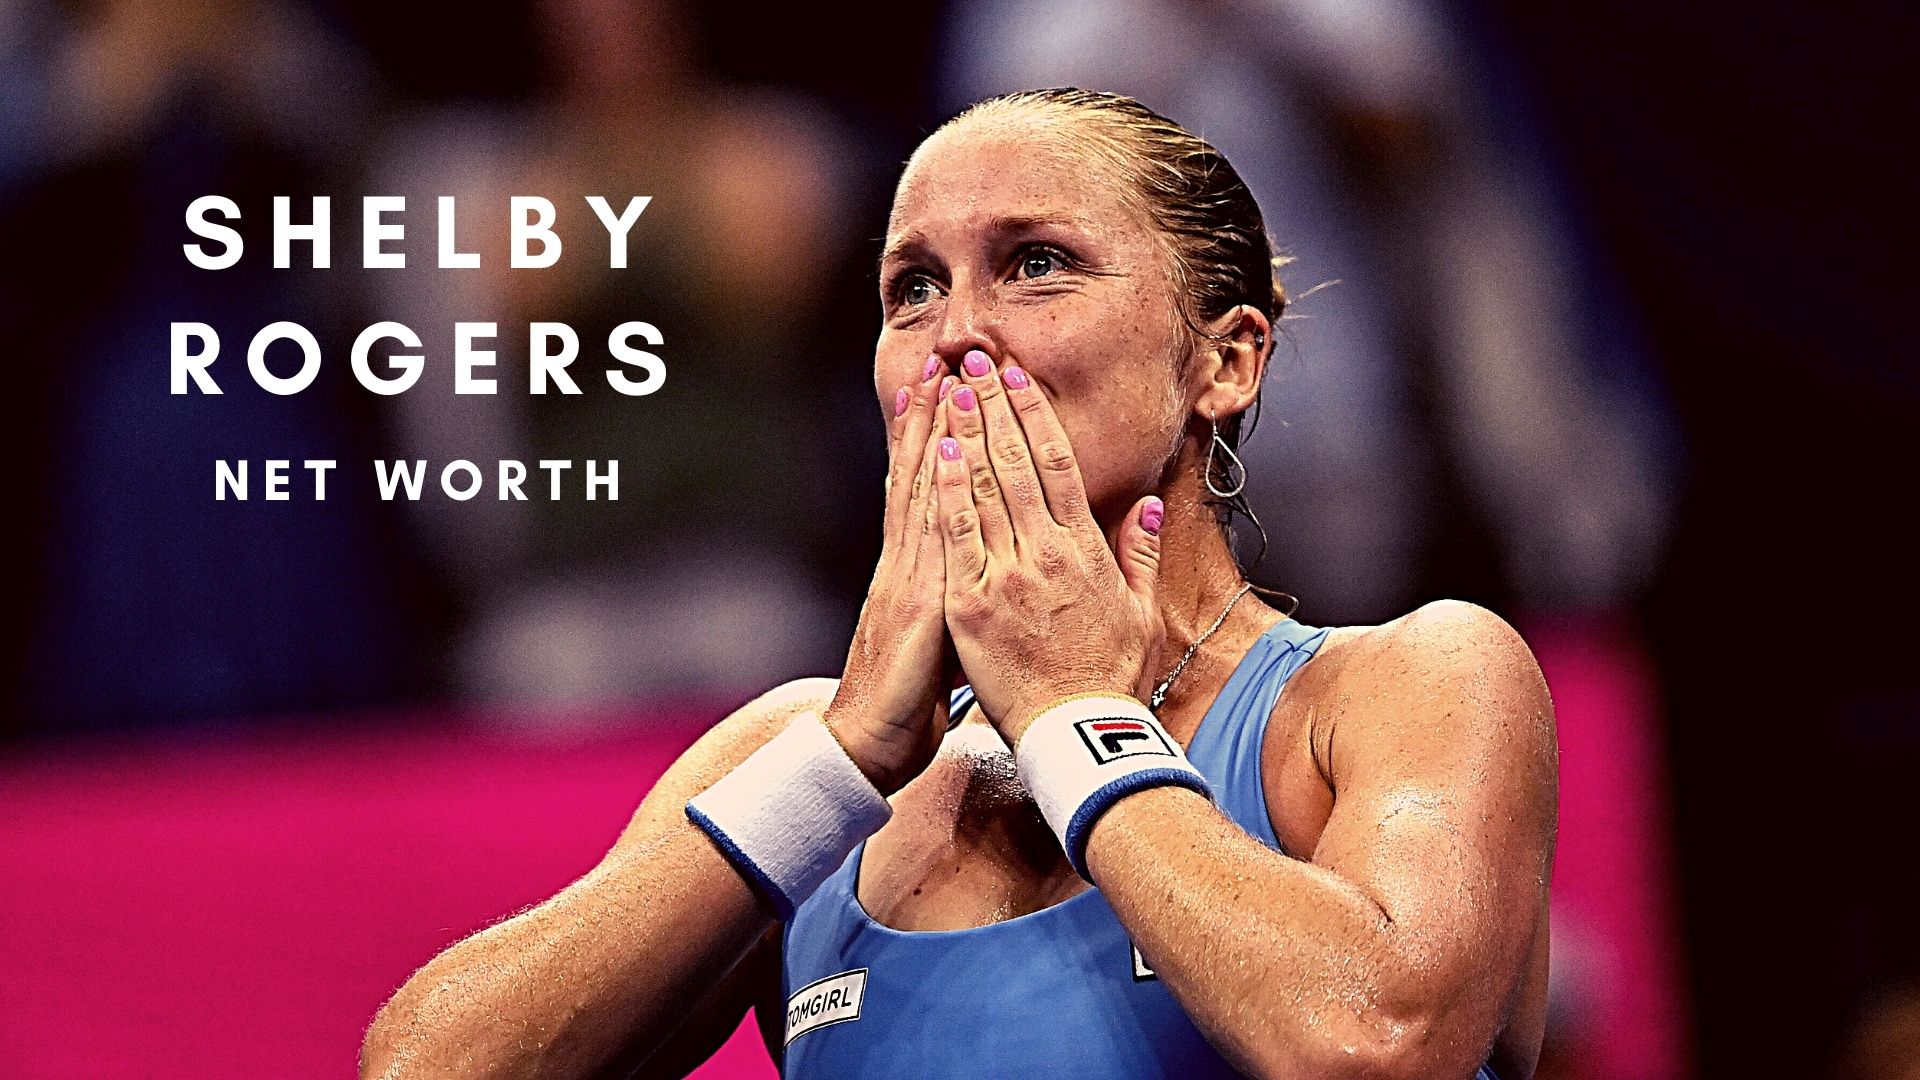 Shelby Rogers is one of the rising stars in the world of tennis